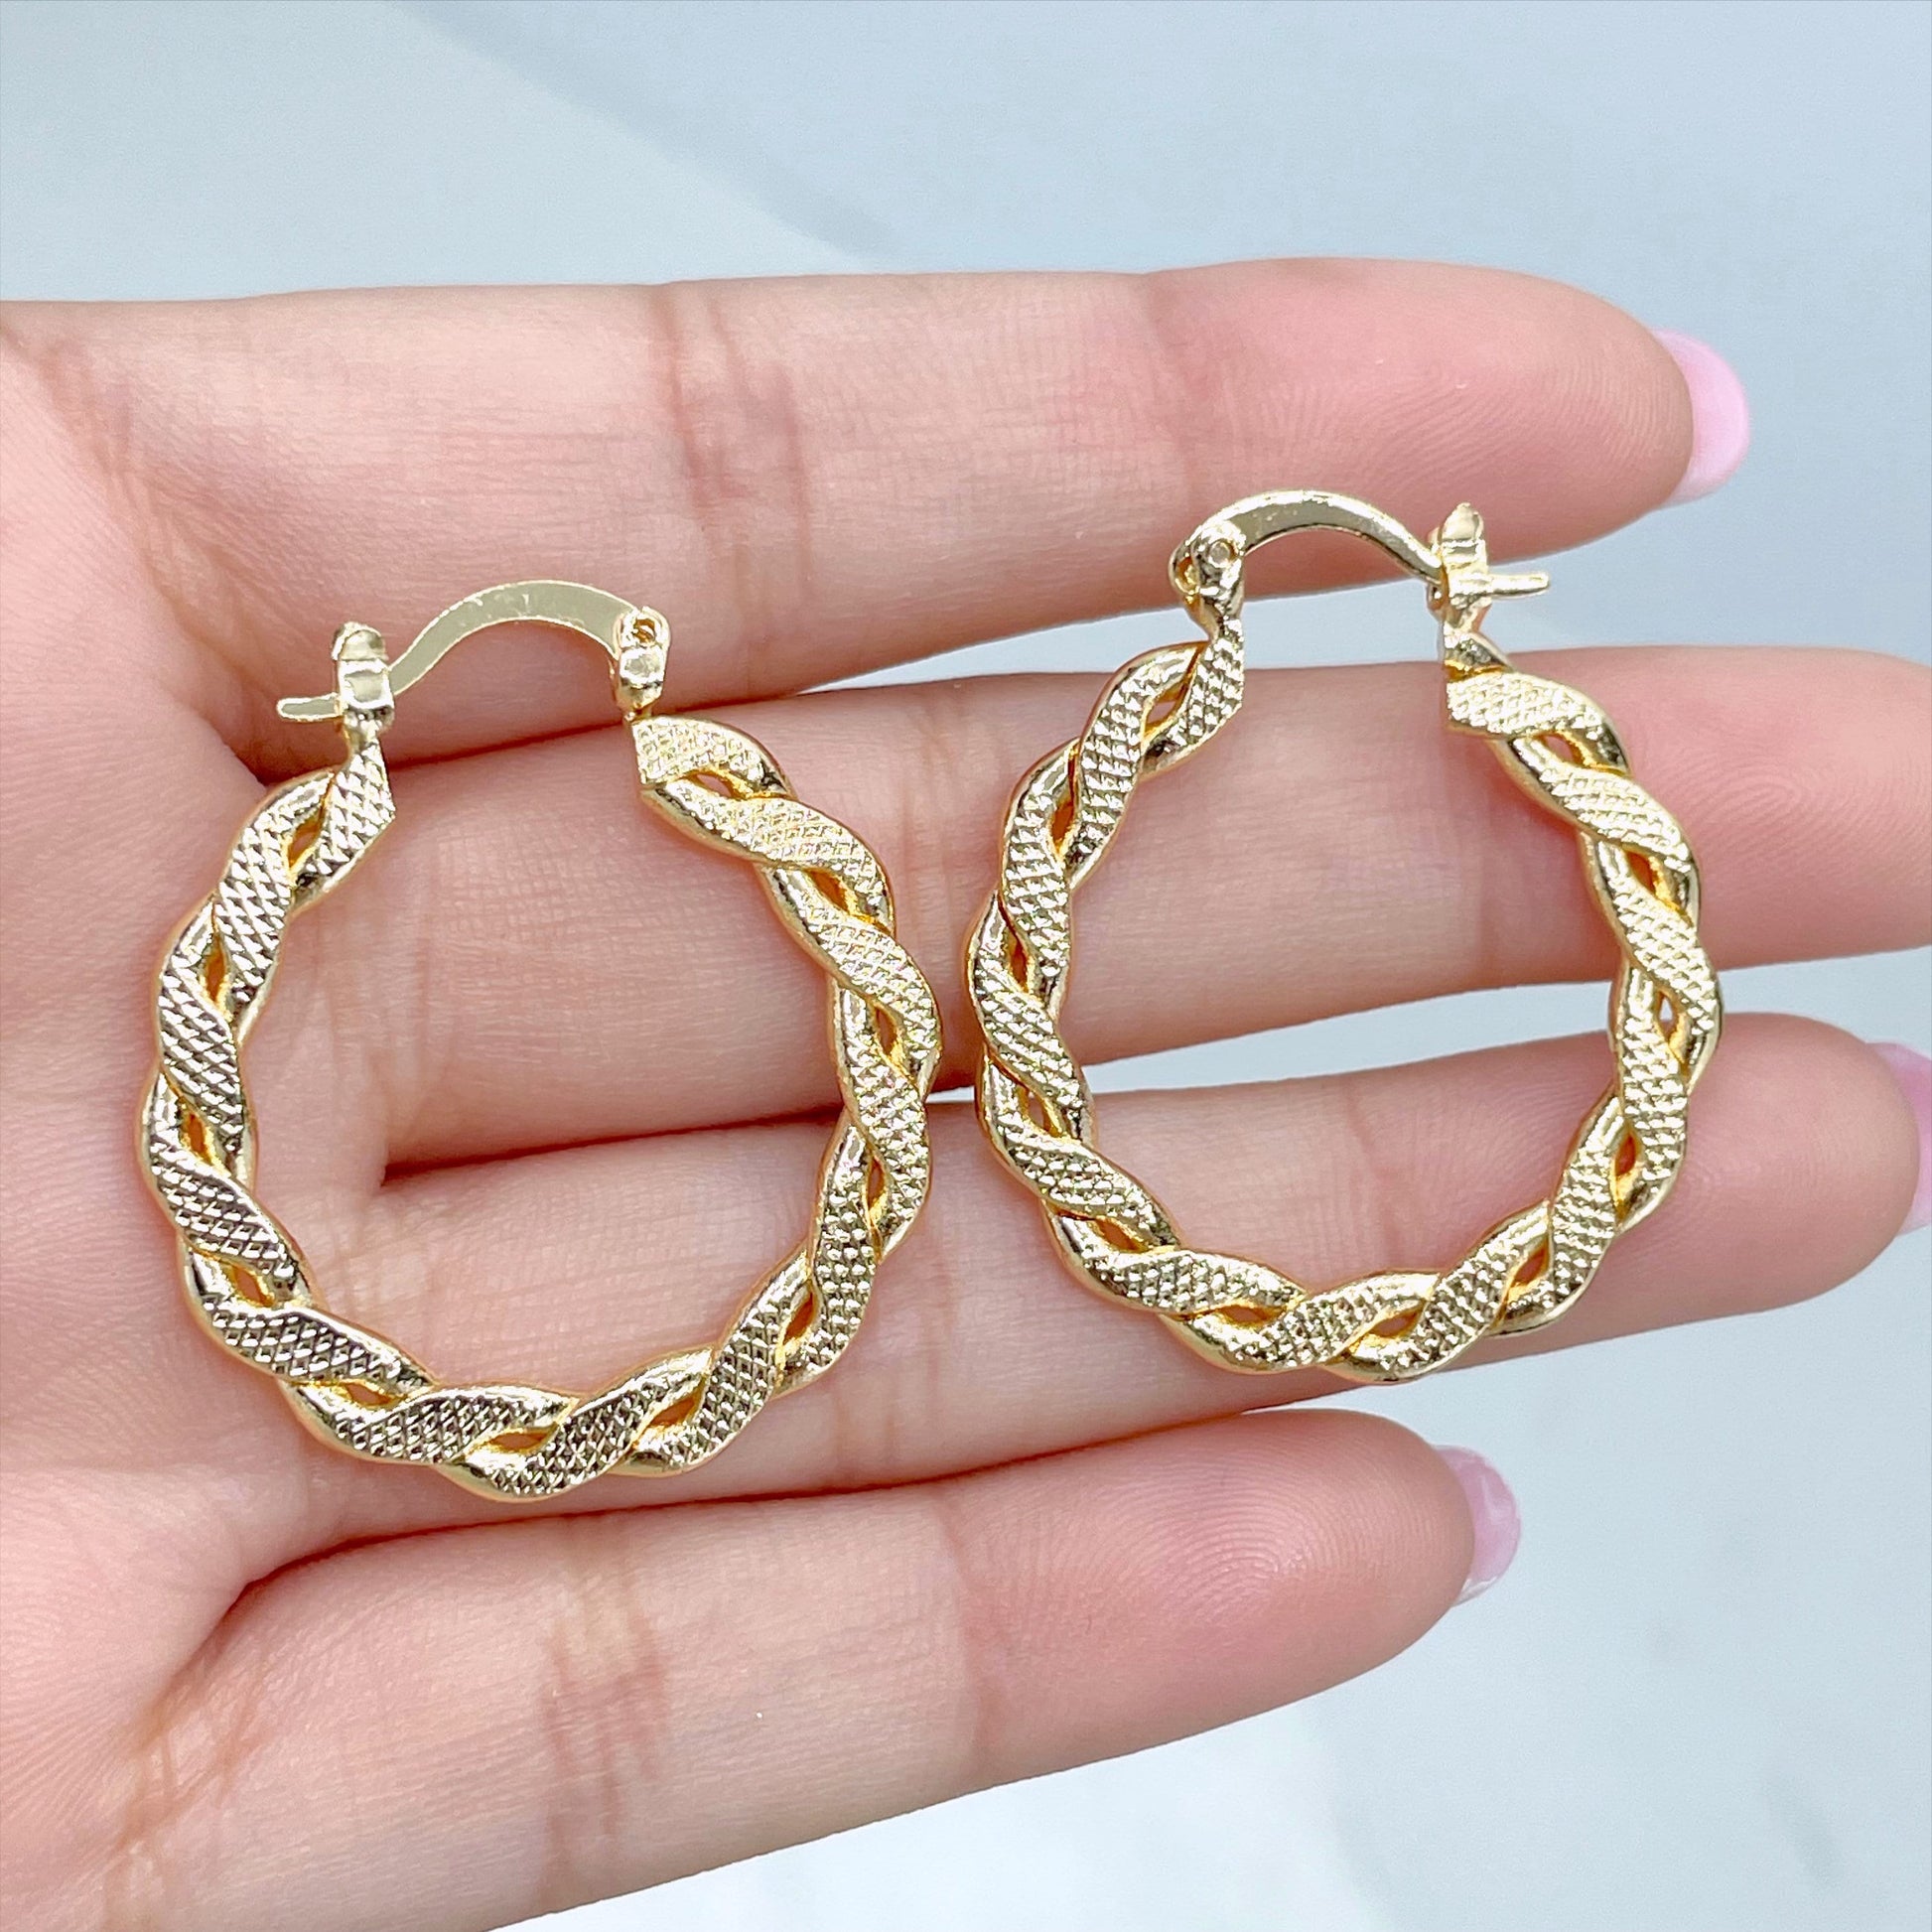 18k Gold Filled Braided 30mm Hoop Textured Earrings, 2mm Thickness, Wholesale Jewelry Making Supplies